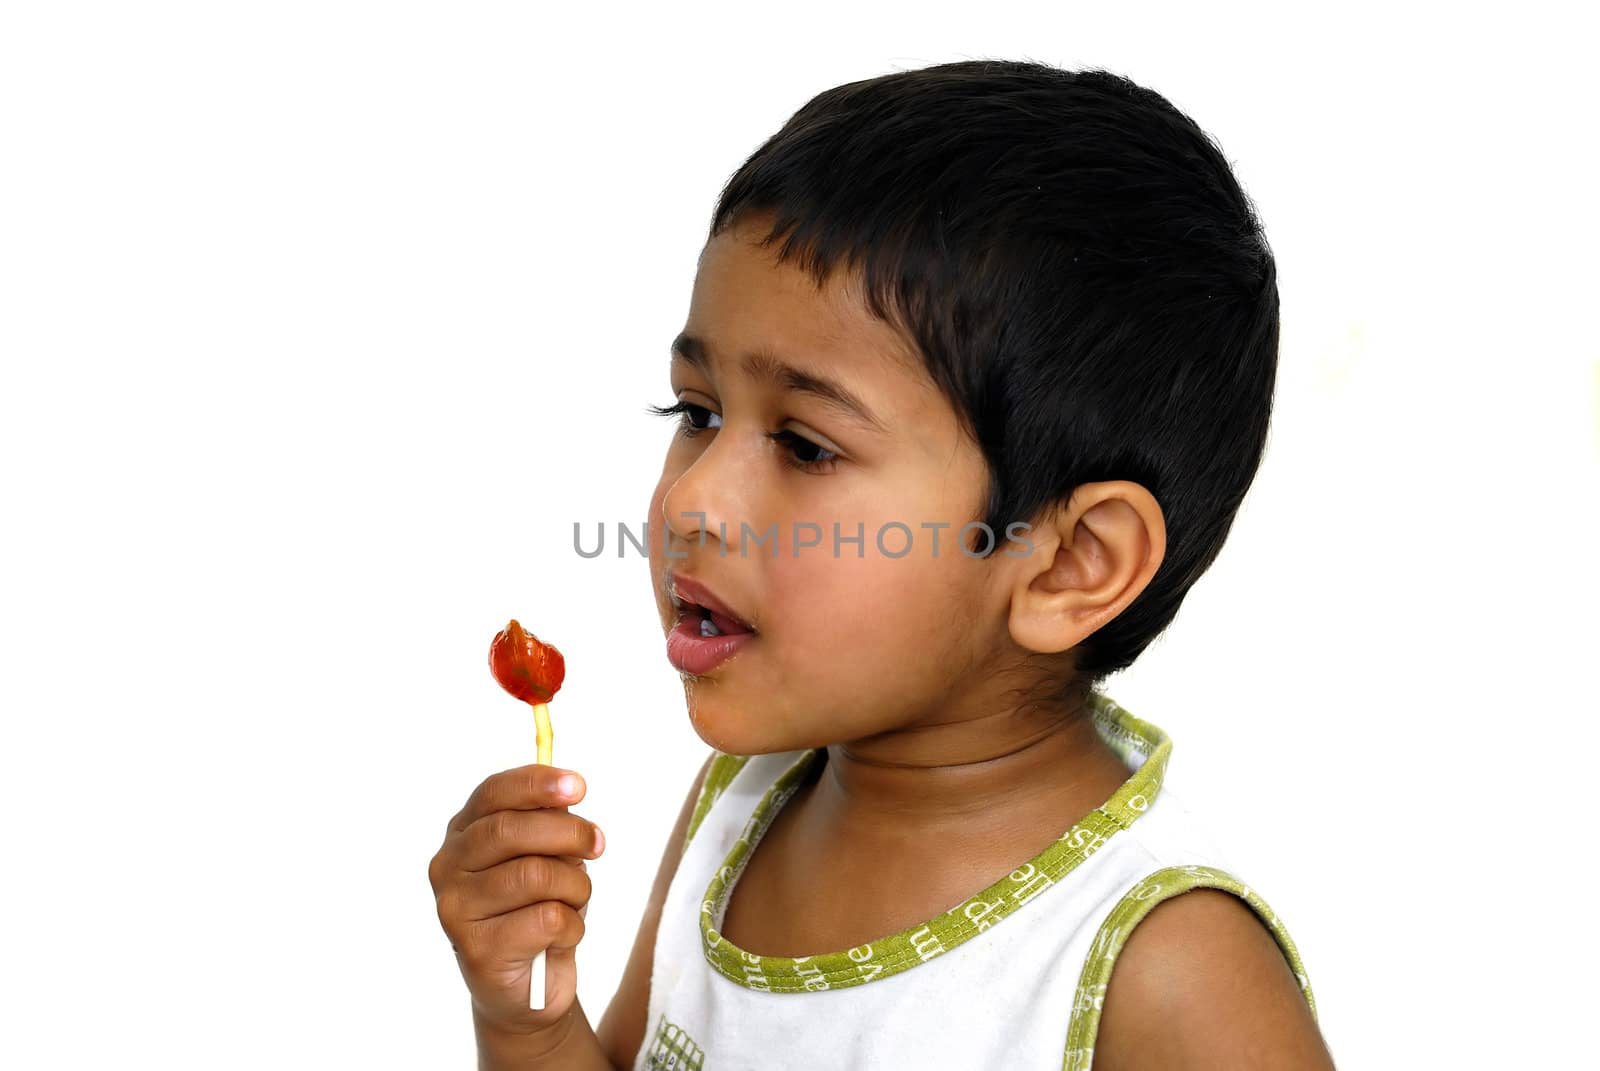 An young handsome kid with his lollypop